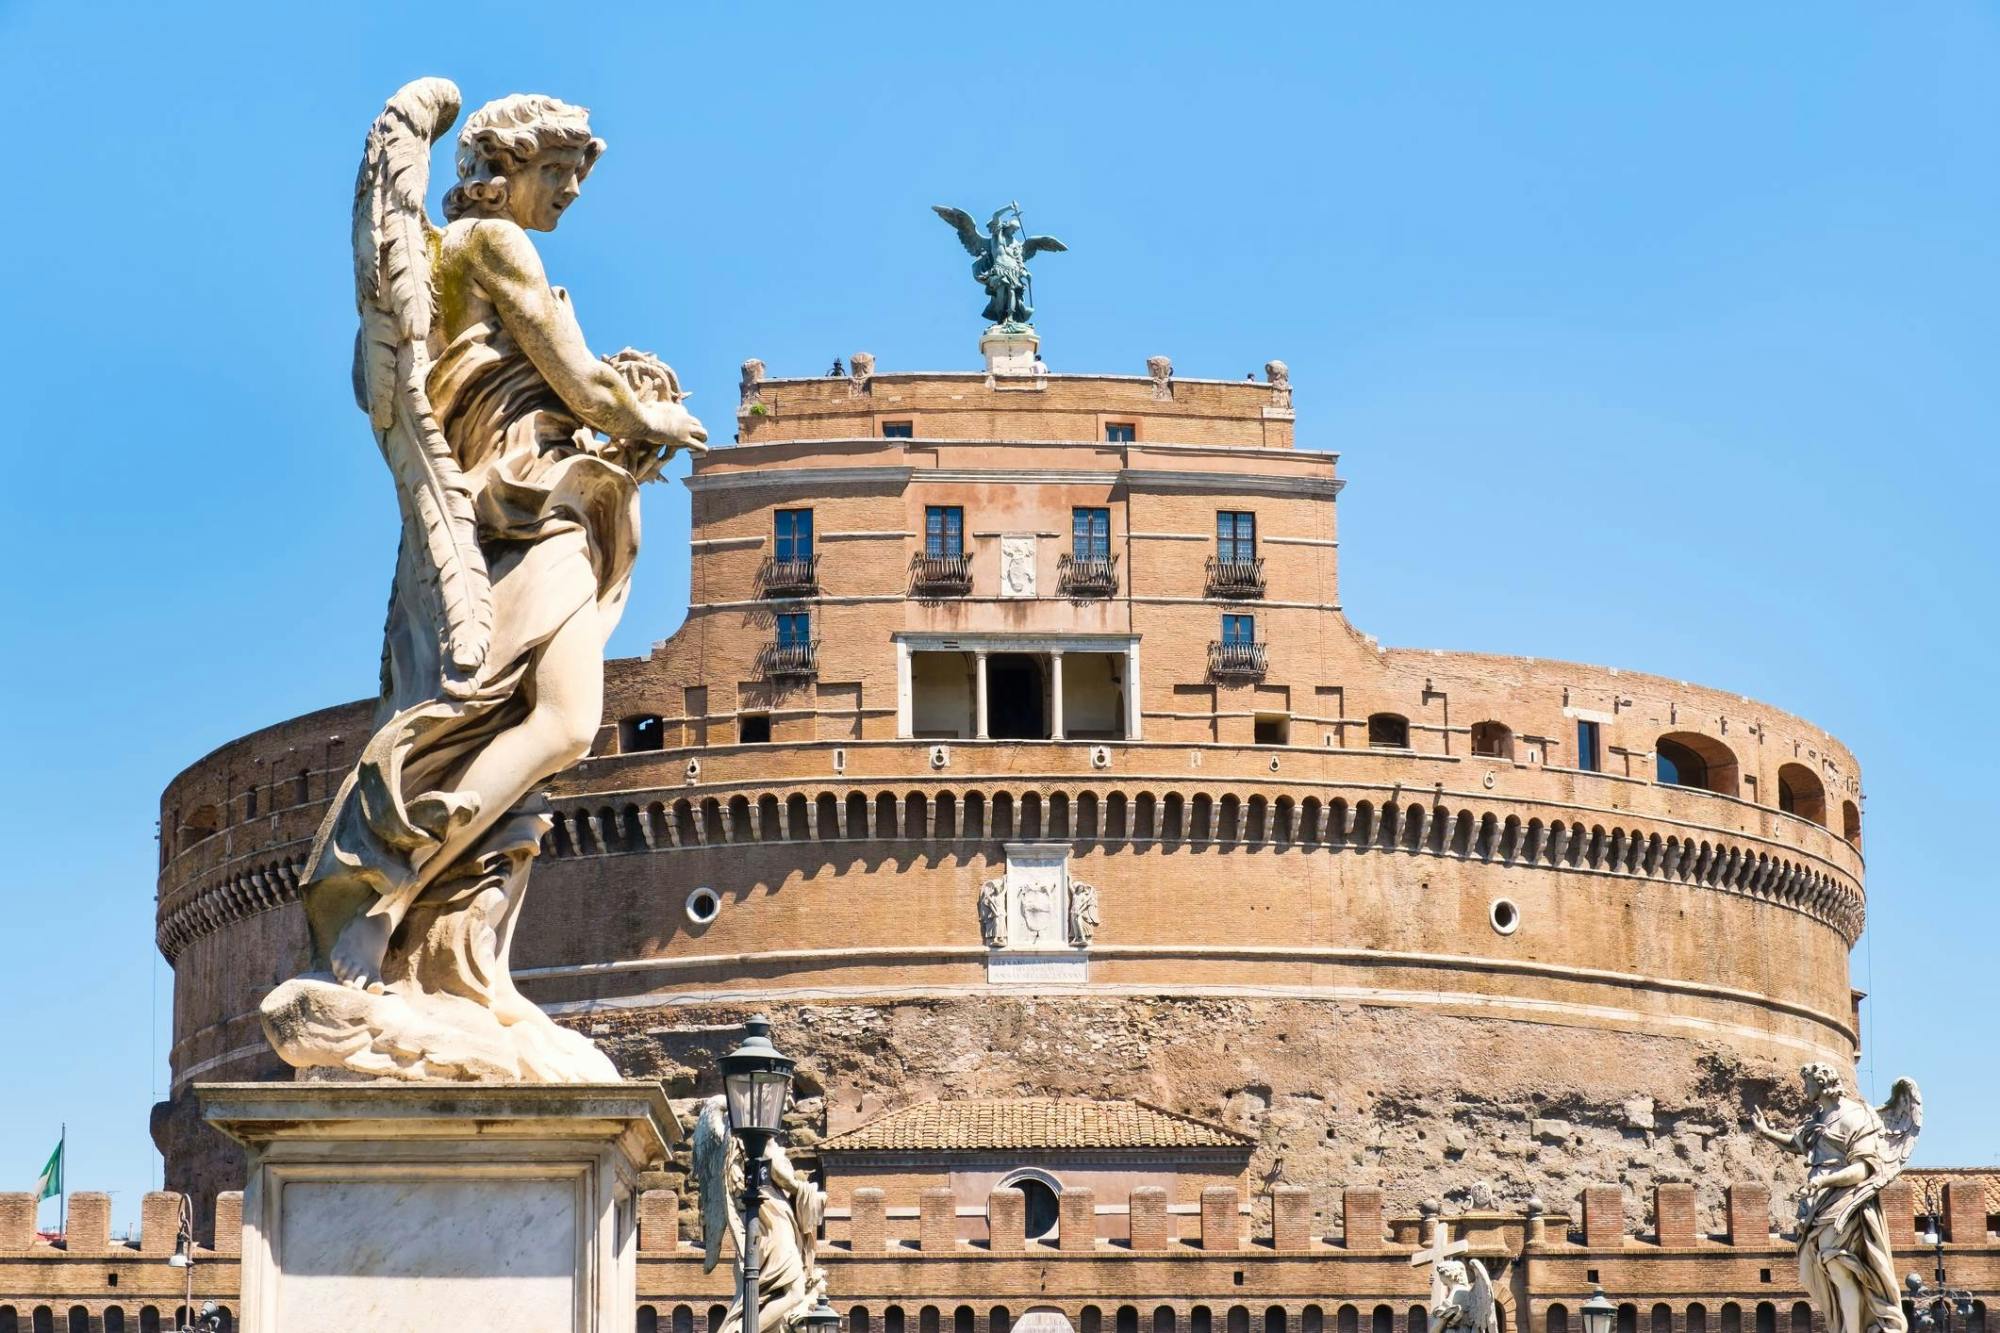 Castel Sant’ Angelo skip the line ticket with audio tour on your phone.